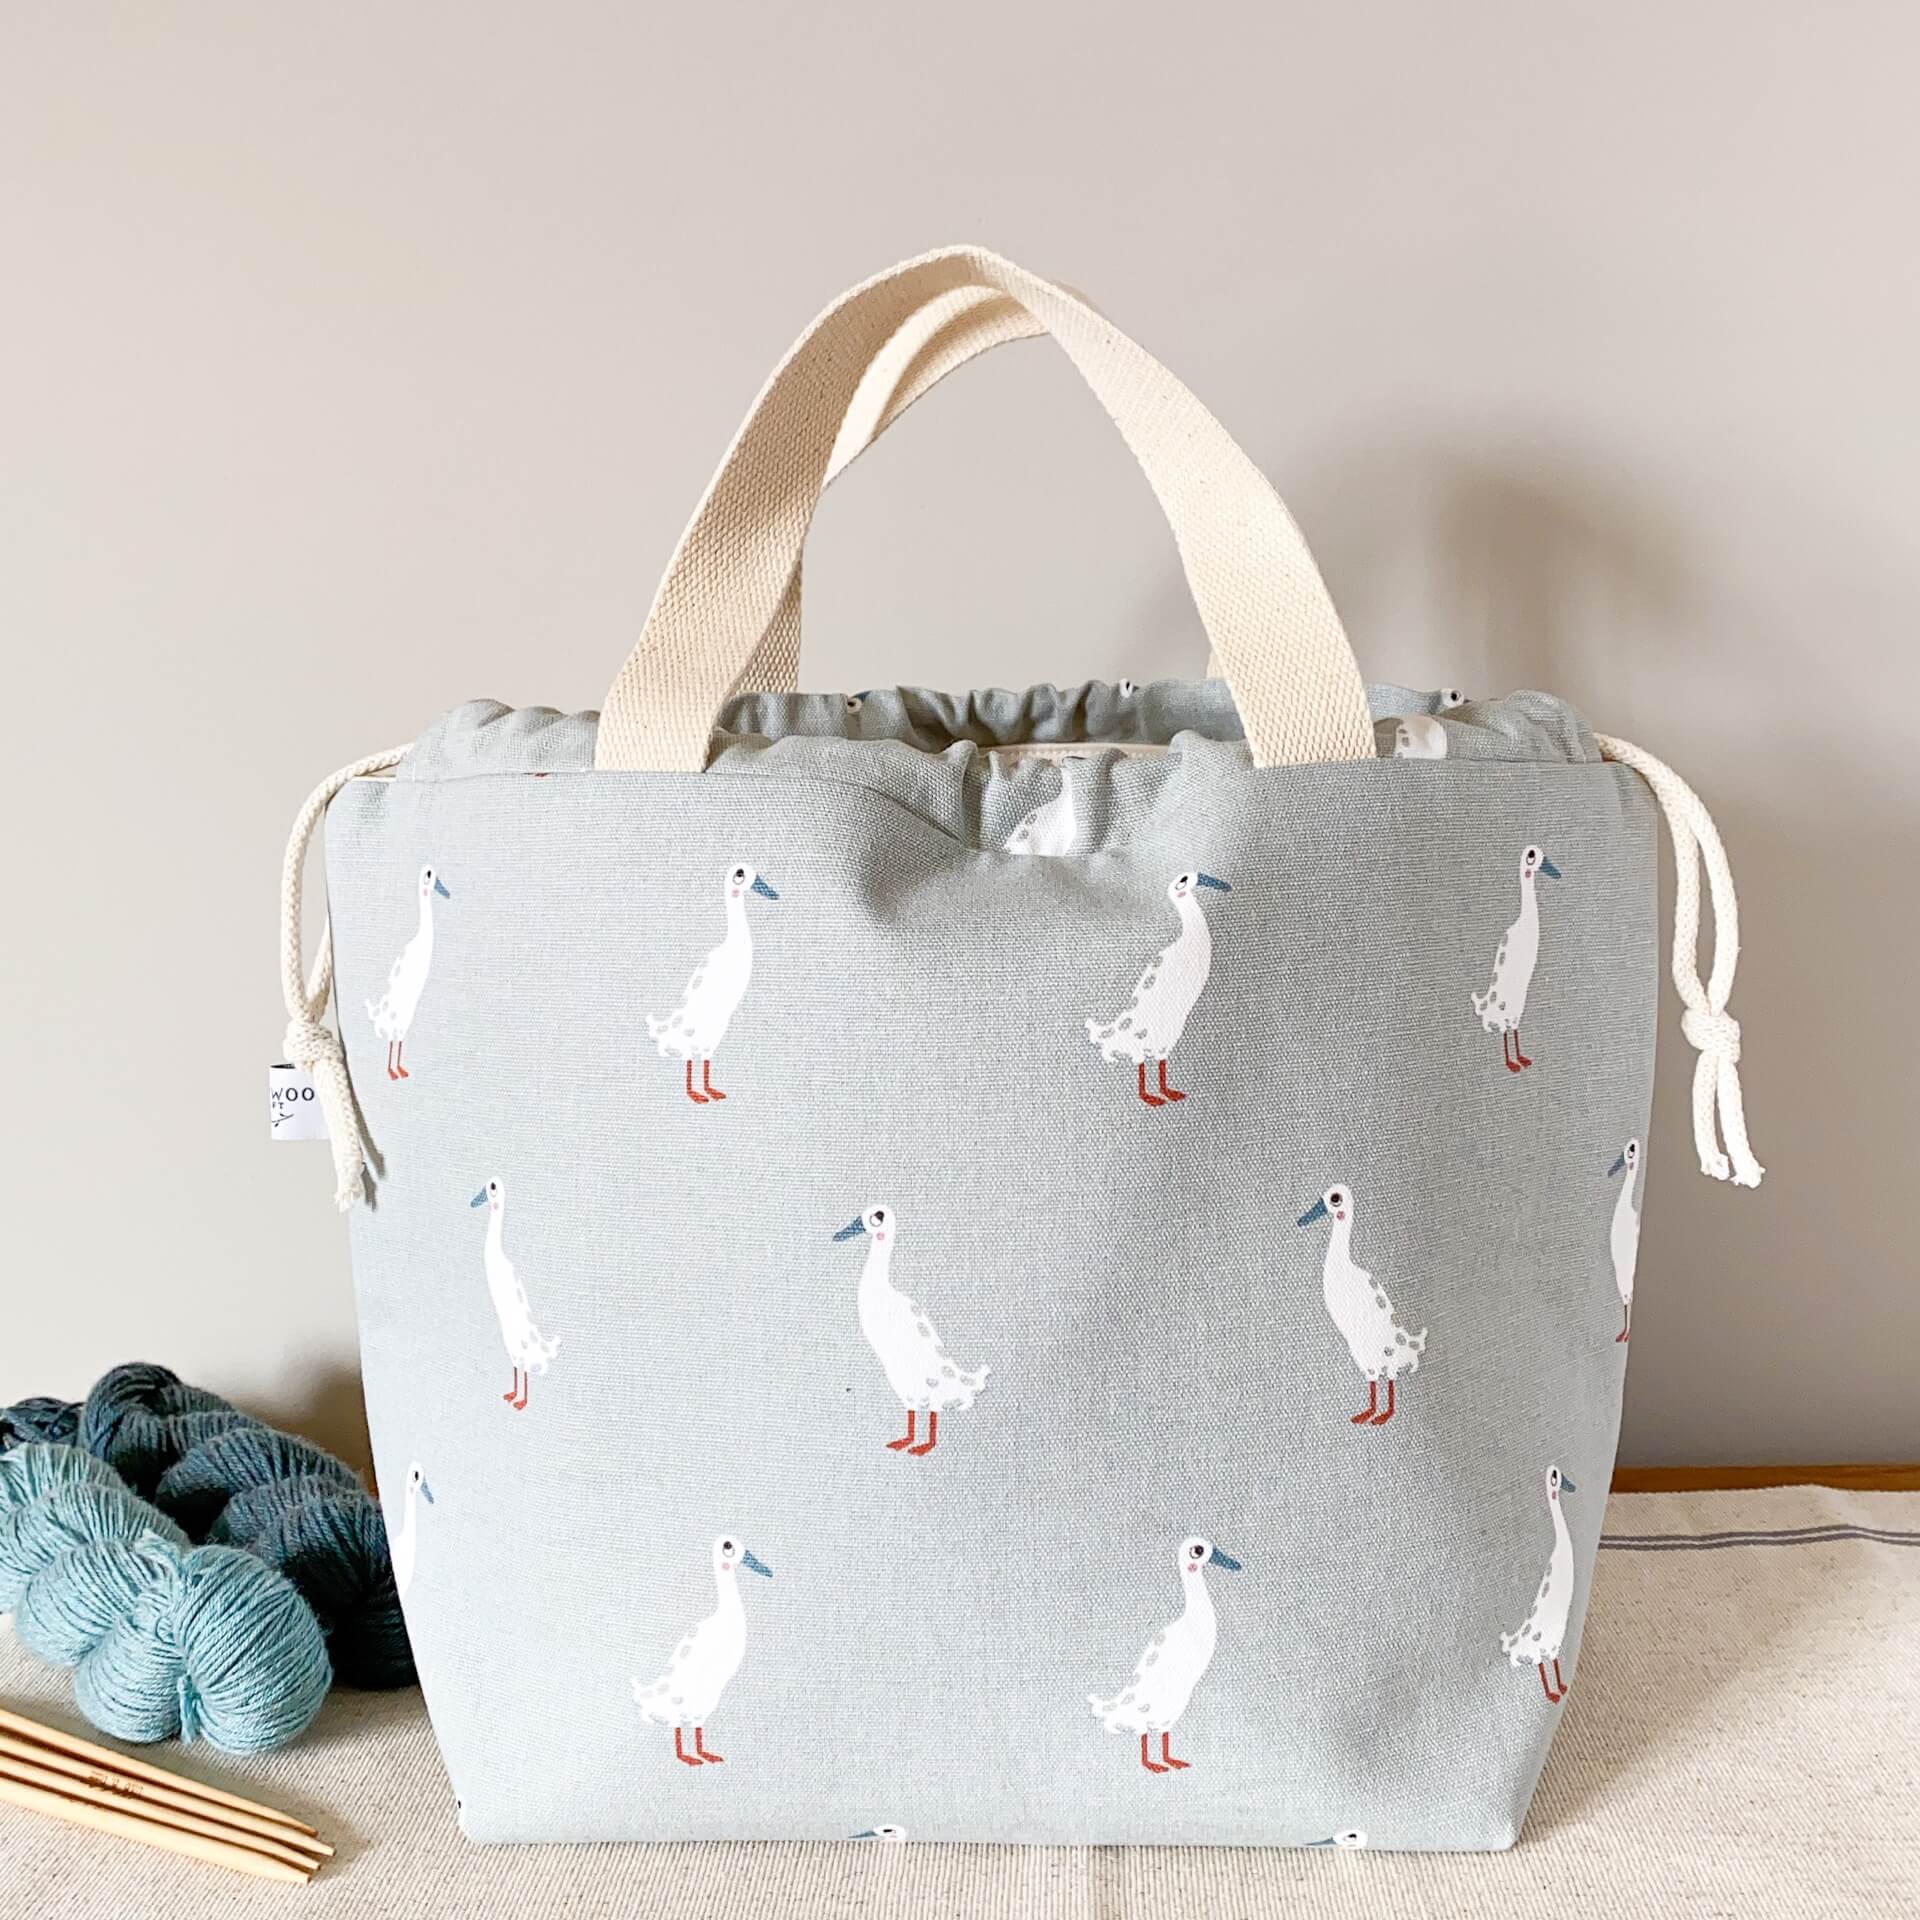 A large duck printed fabric bag sits on a table next to two skeins of yarn and knitting needles. The bag  has a grey background and the main feature of the fabric is some white runner ducks. 